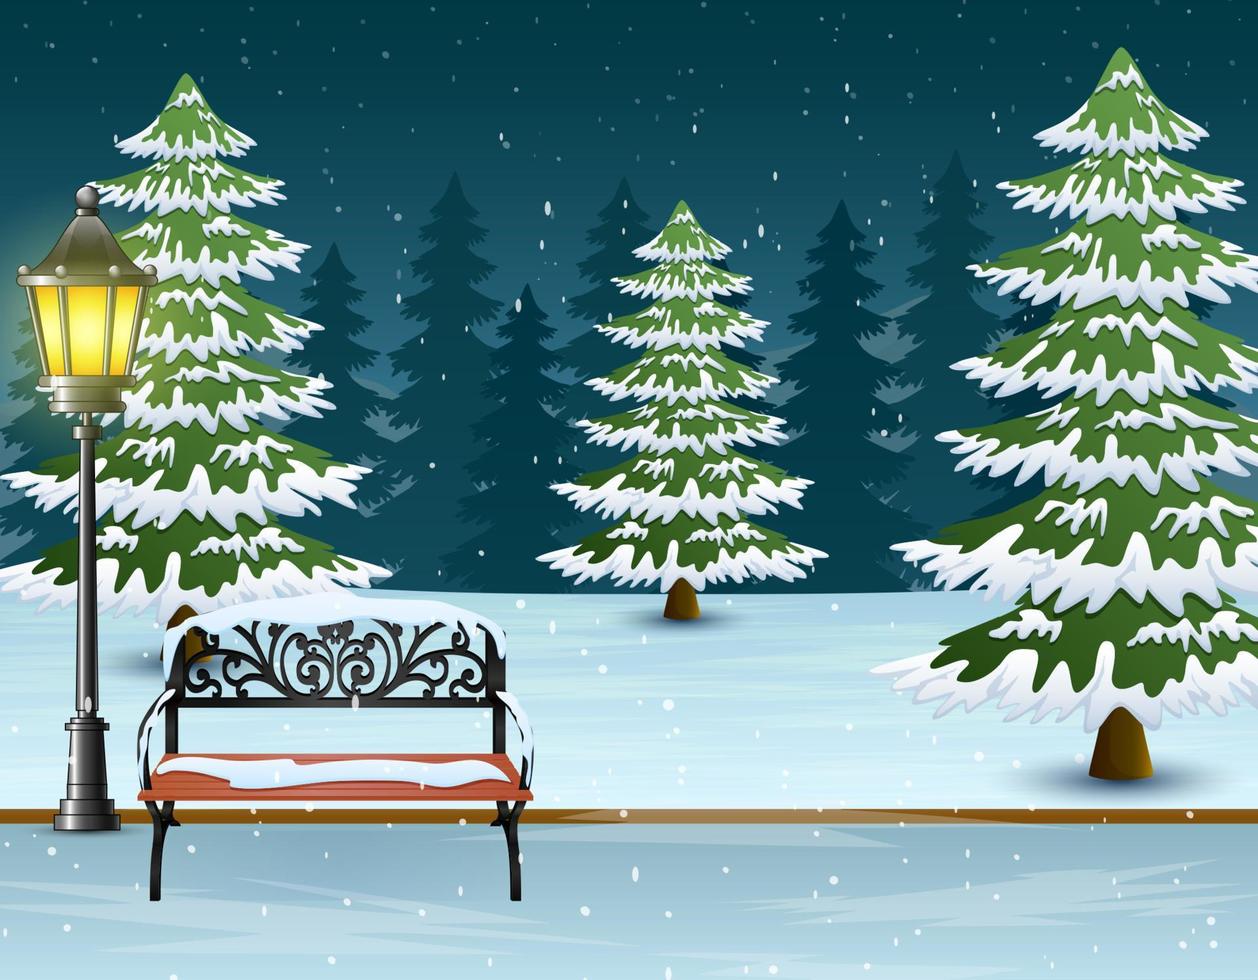 Snow covered bench with street lamp and fir trees background vector